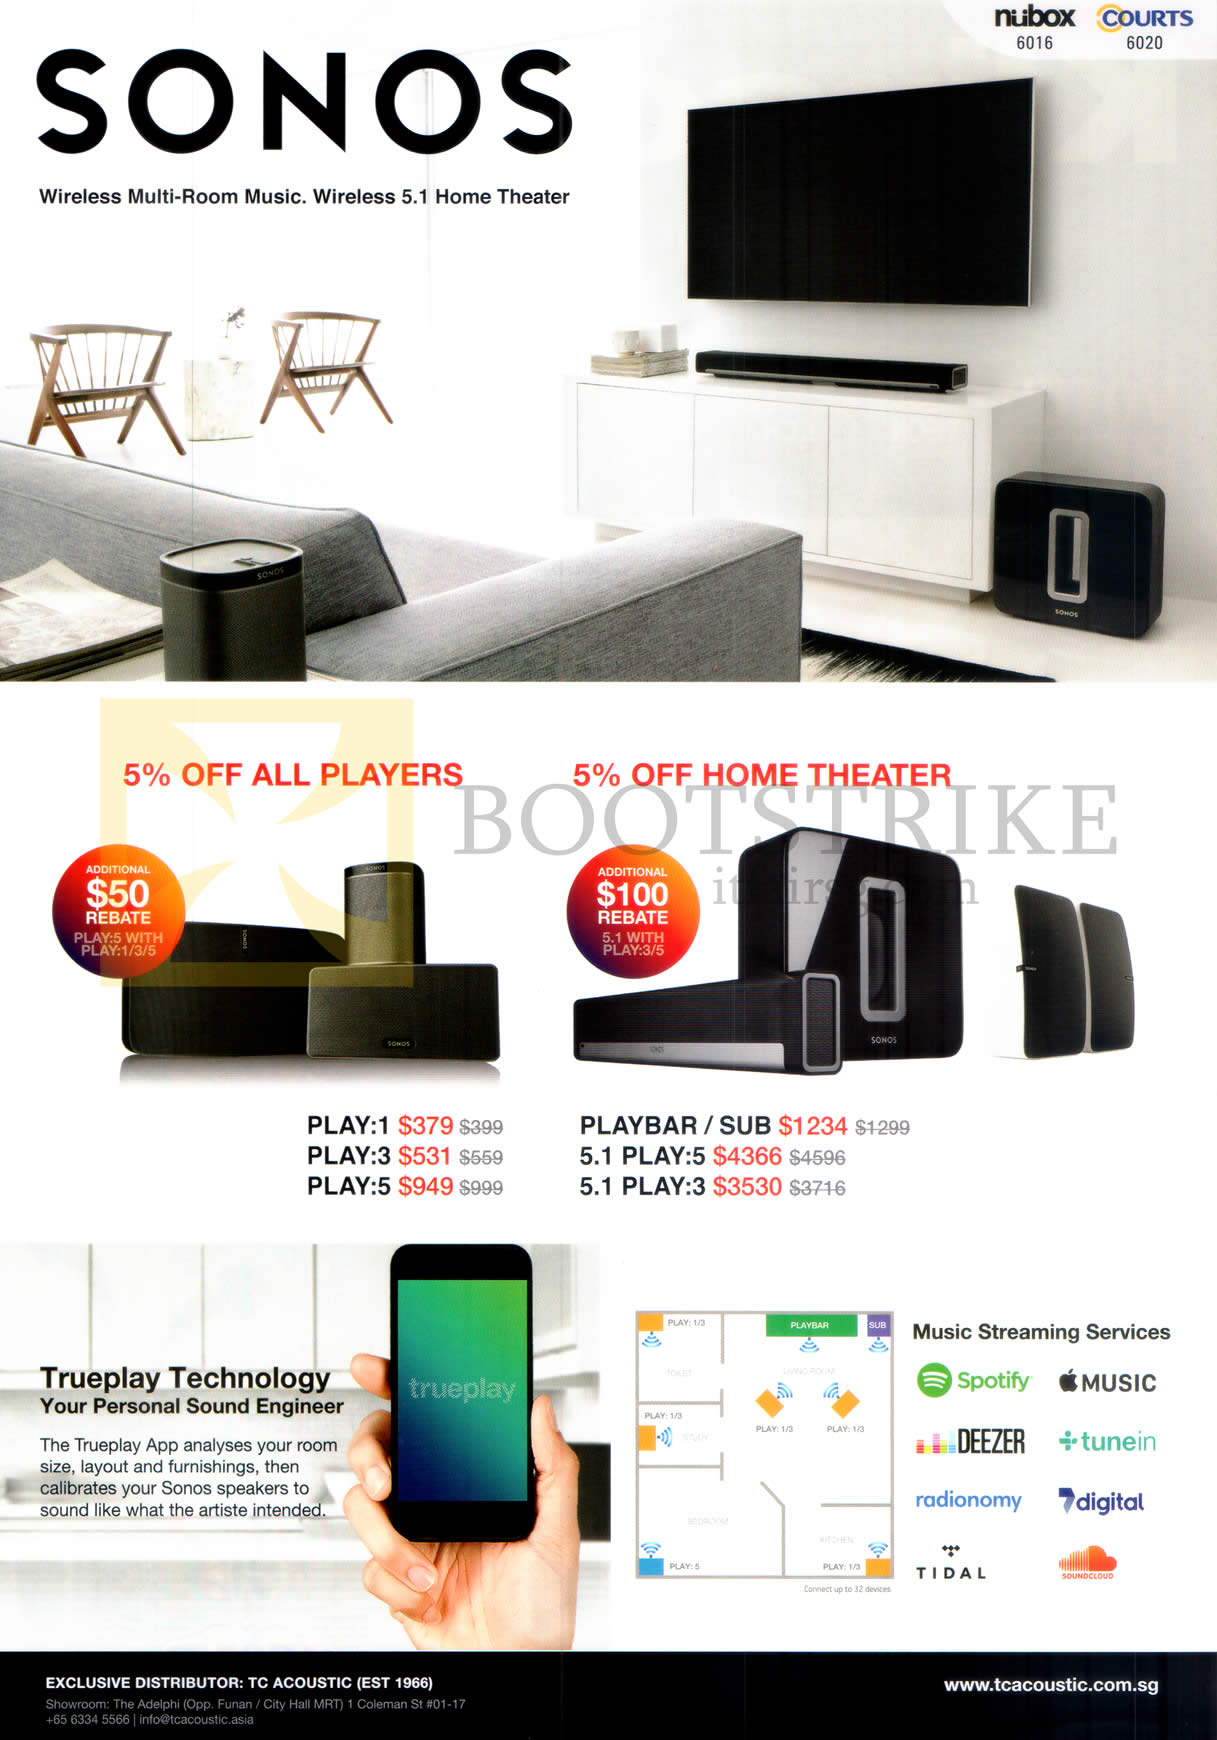 PC SHOW 2016 price list image brochure of Sonos TC Acoustic Speakers, Home Theatre Systems, Play 1, 3, 5